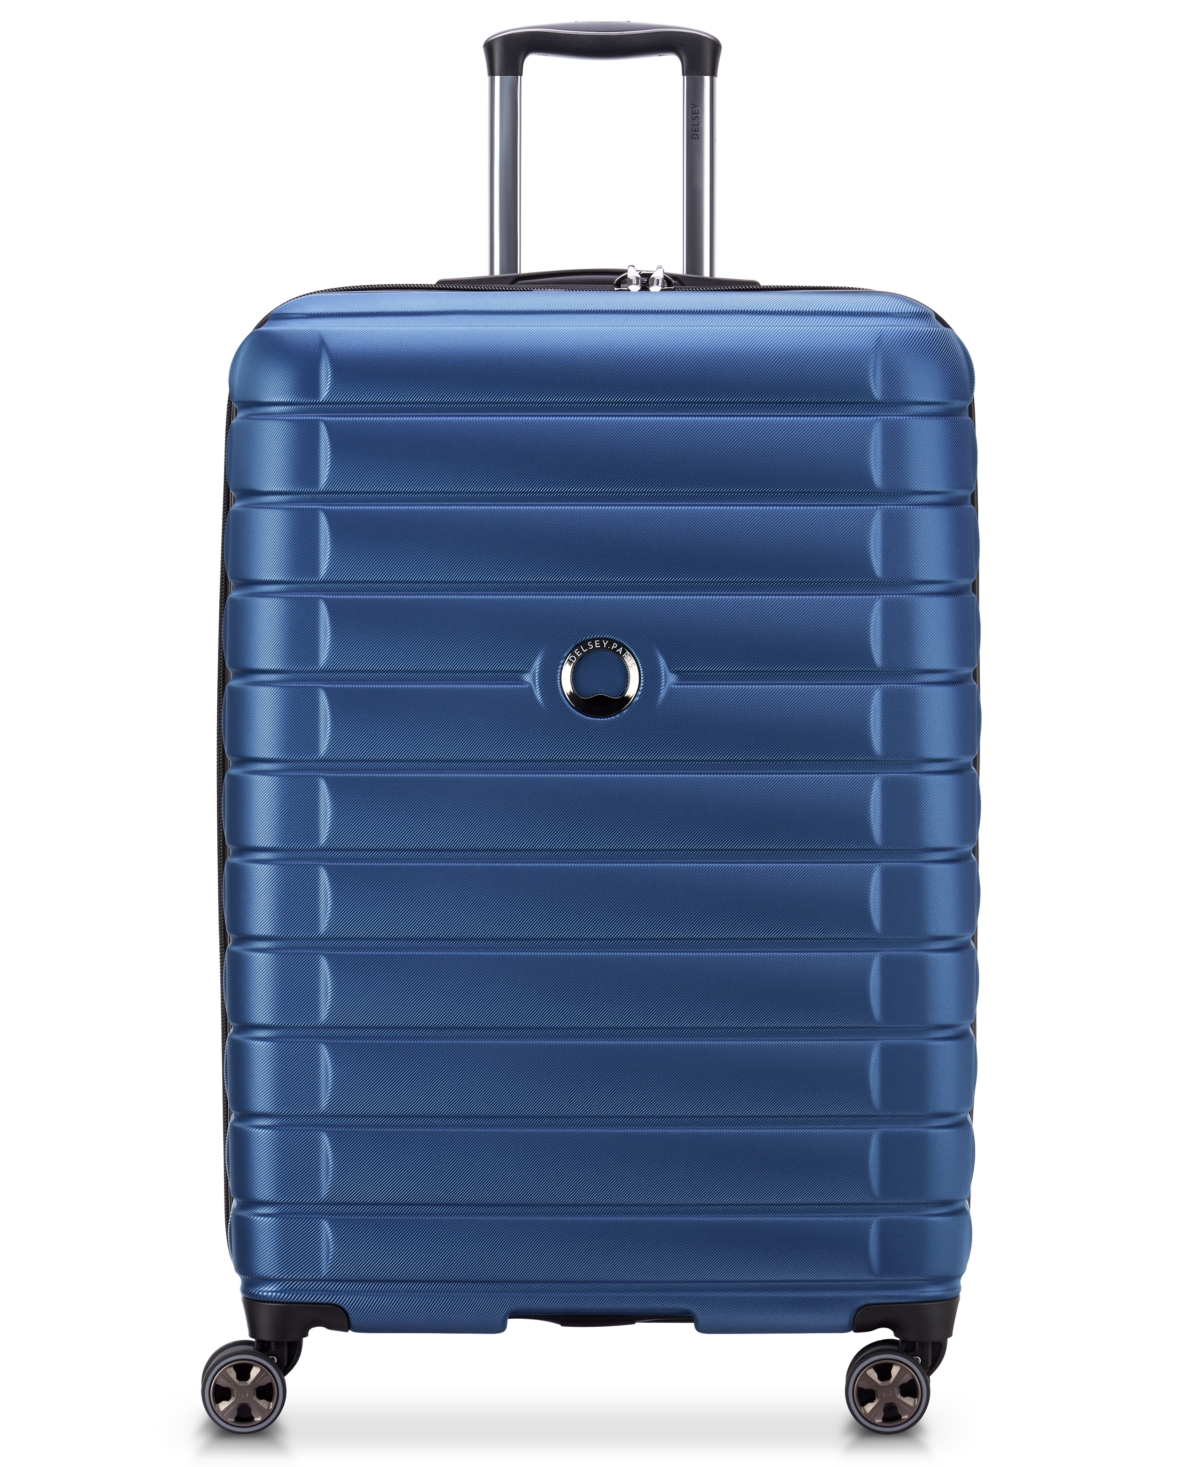 Shadow 5.0 Expandable 27" Check-in Spinner Luggage - Cobalt Blue